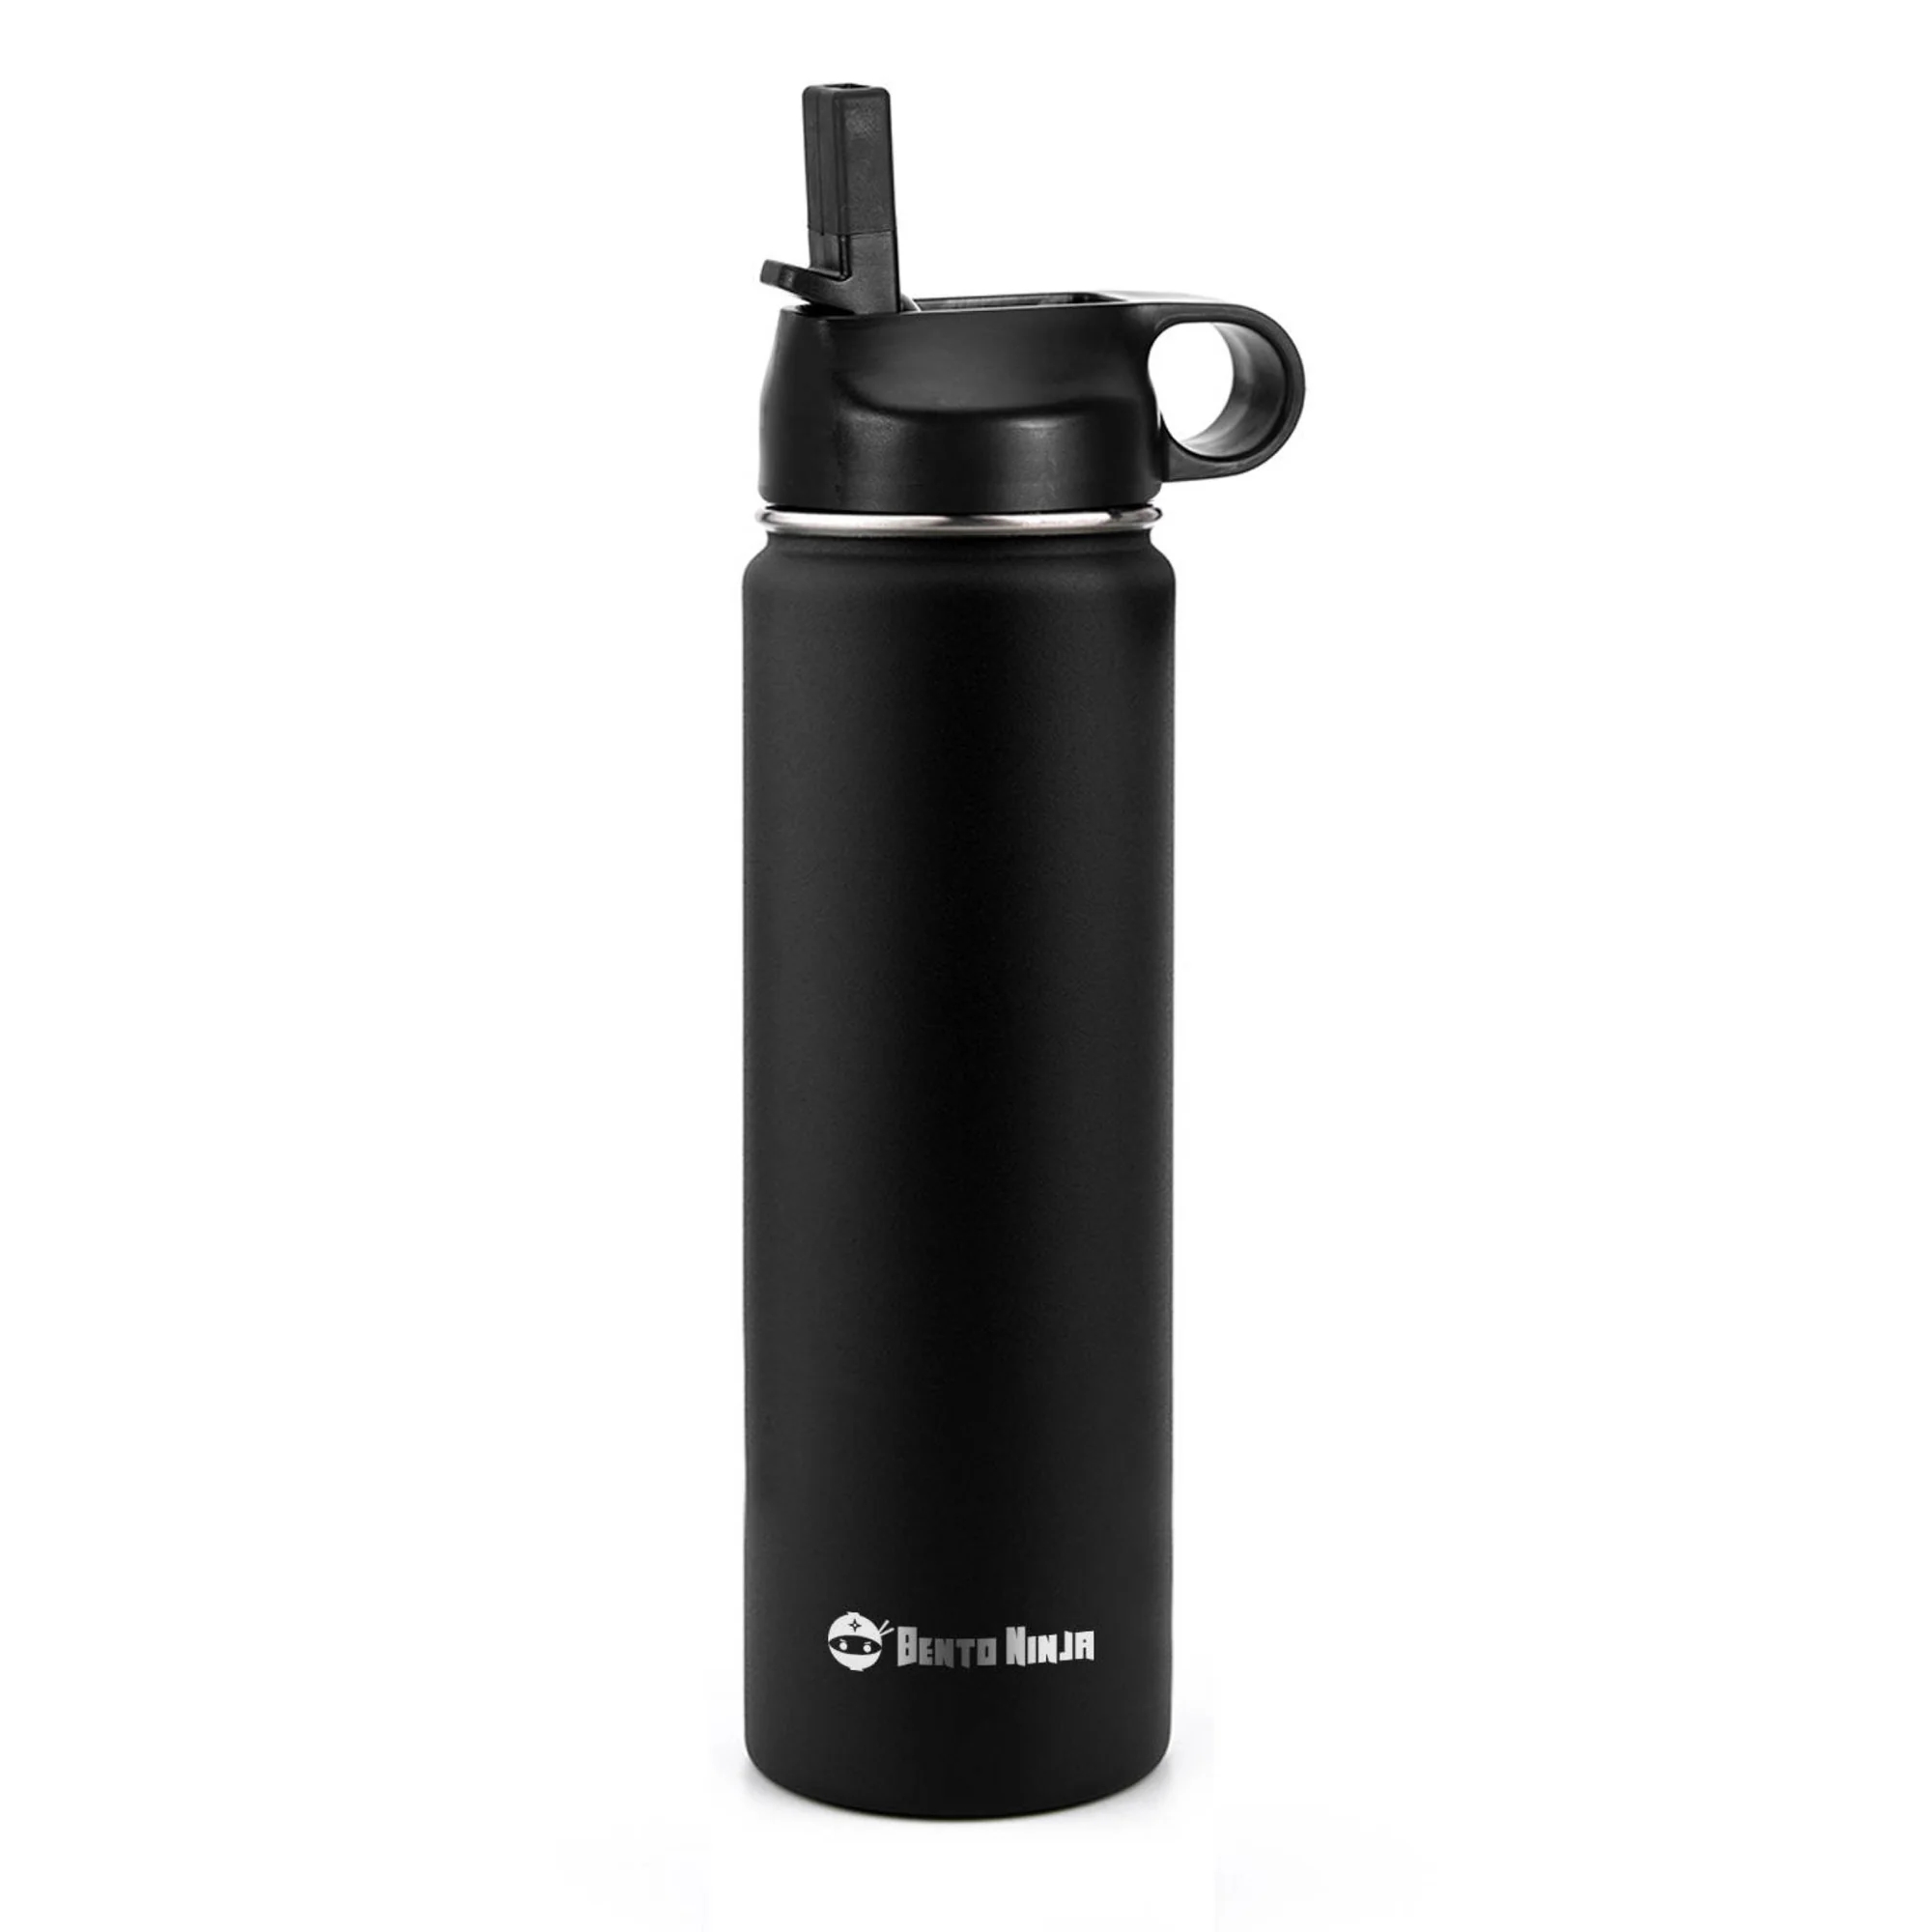 You Got This! Insulated Stainless Steel Water Bottle – Inclusive Future